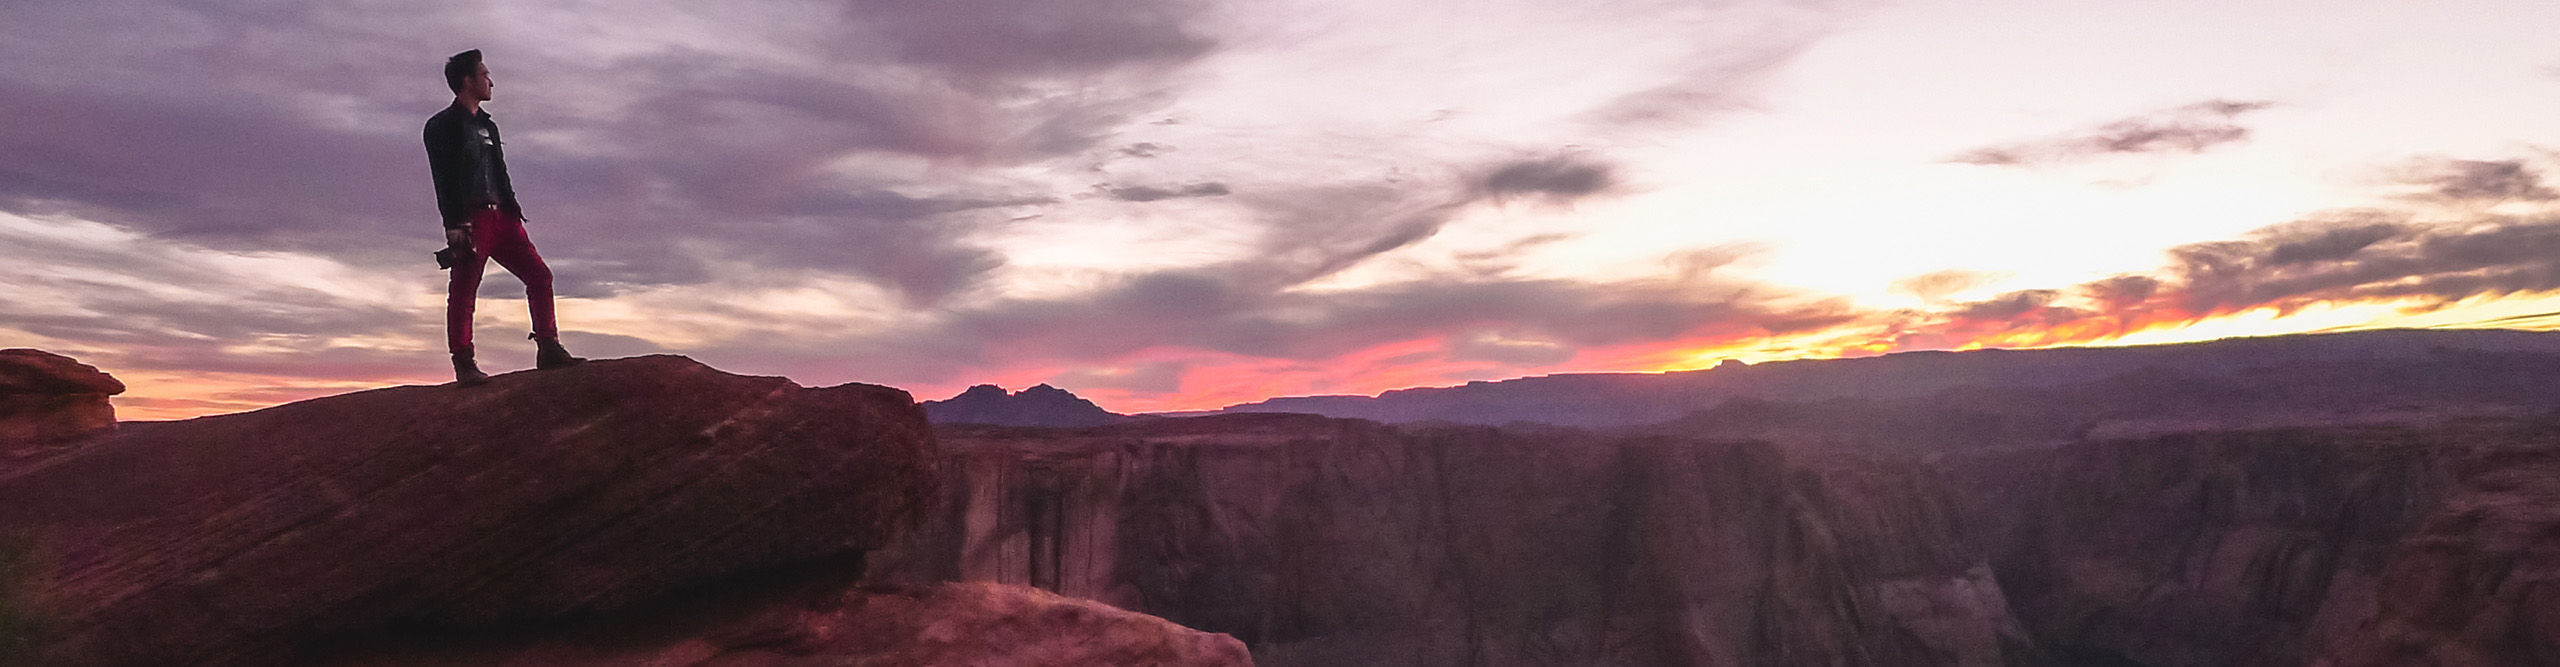 Photographer standing on top of Horseshoe Bend overlooking Colorado River at sunset, Arizona, USA